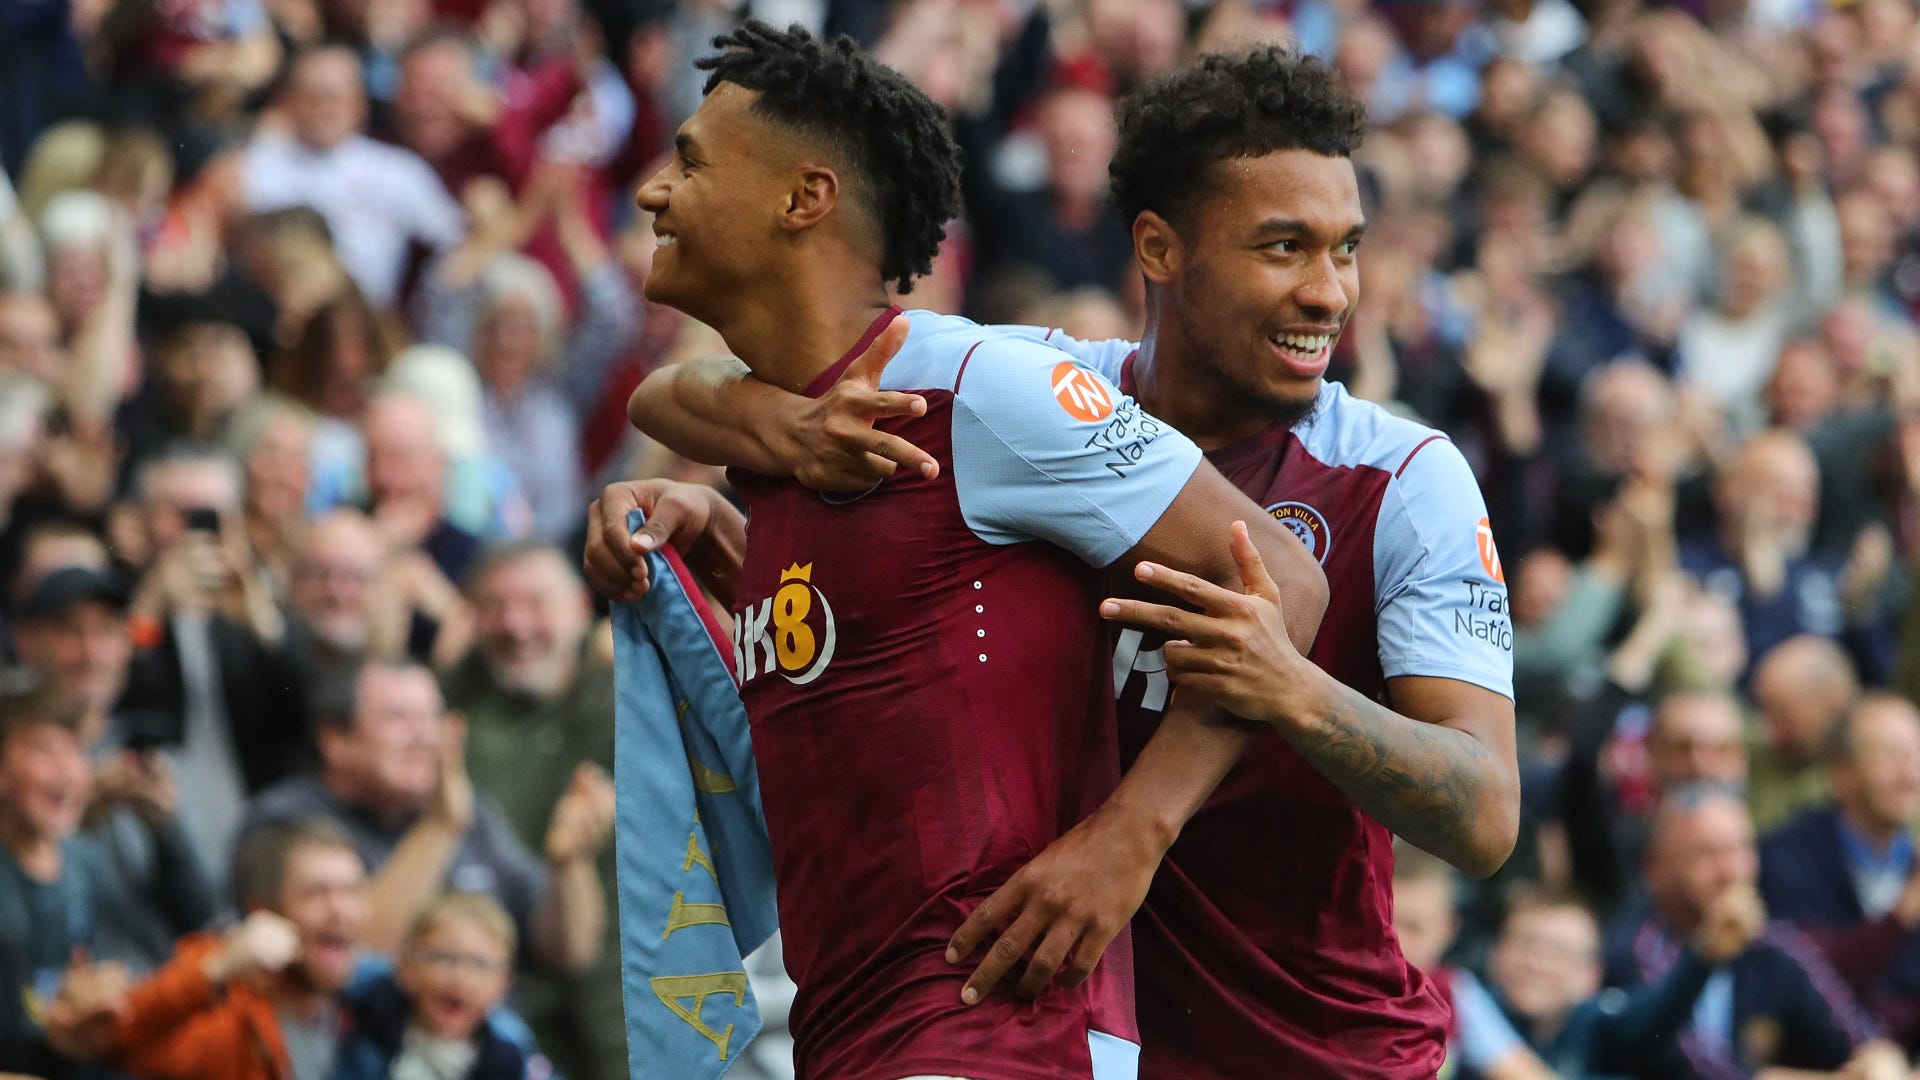 AZ vs Aston Villa Live stream, TV channel, kick-off time and where to watch Goal UK